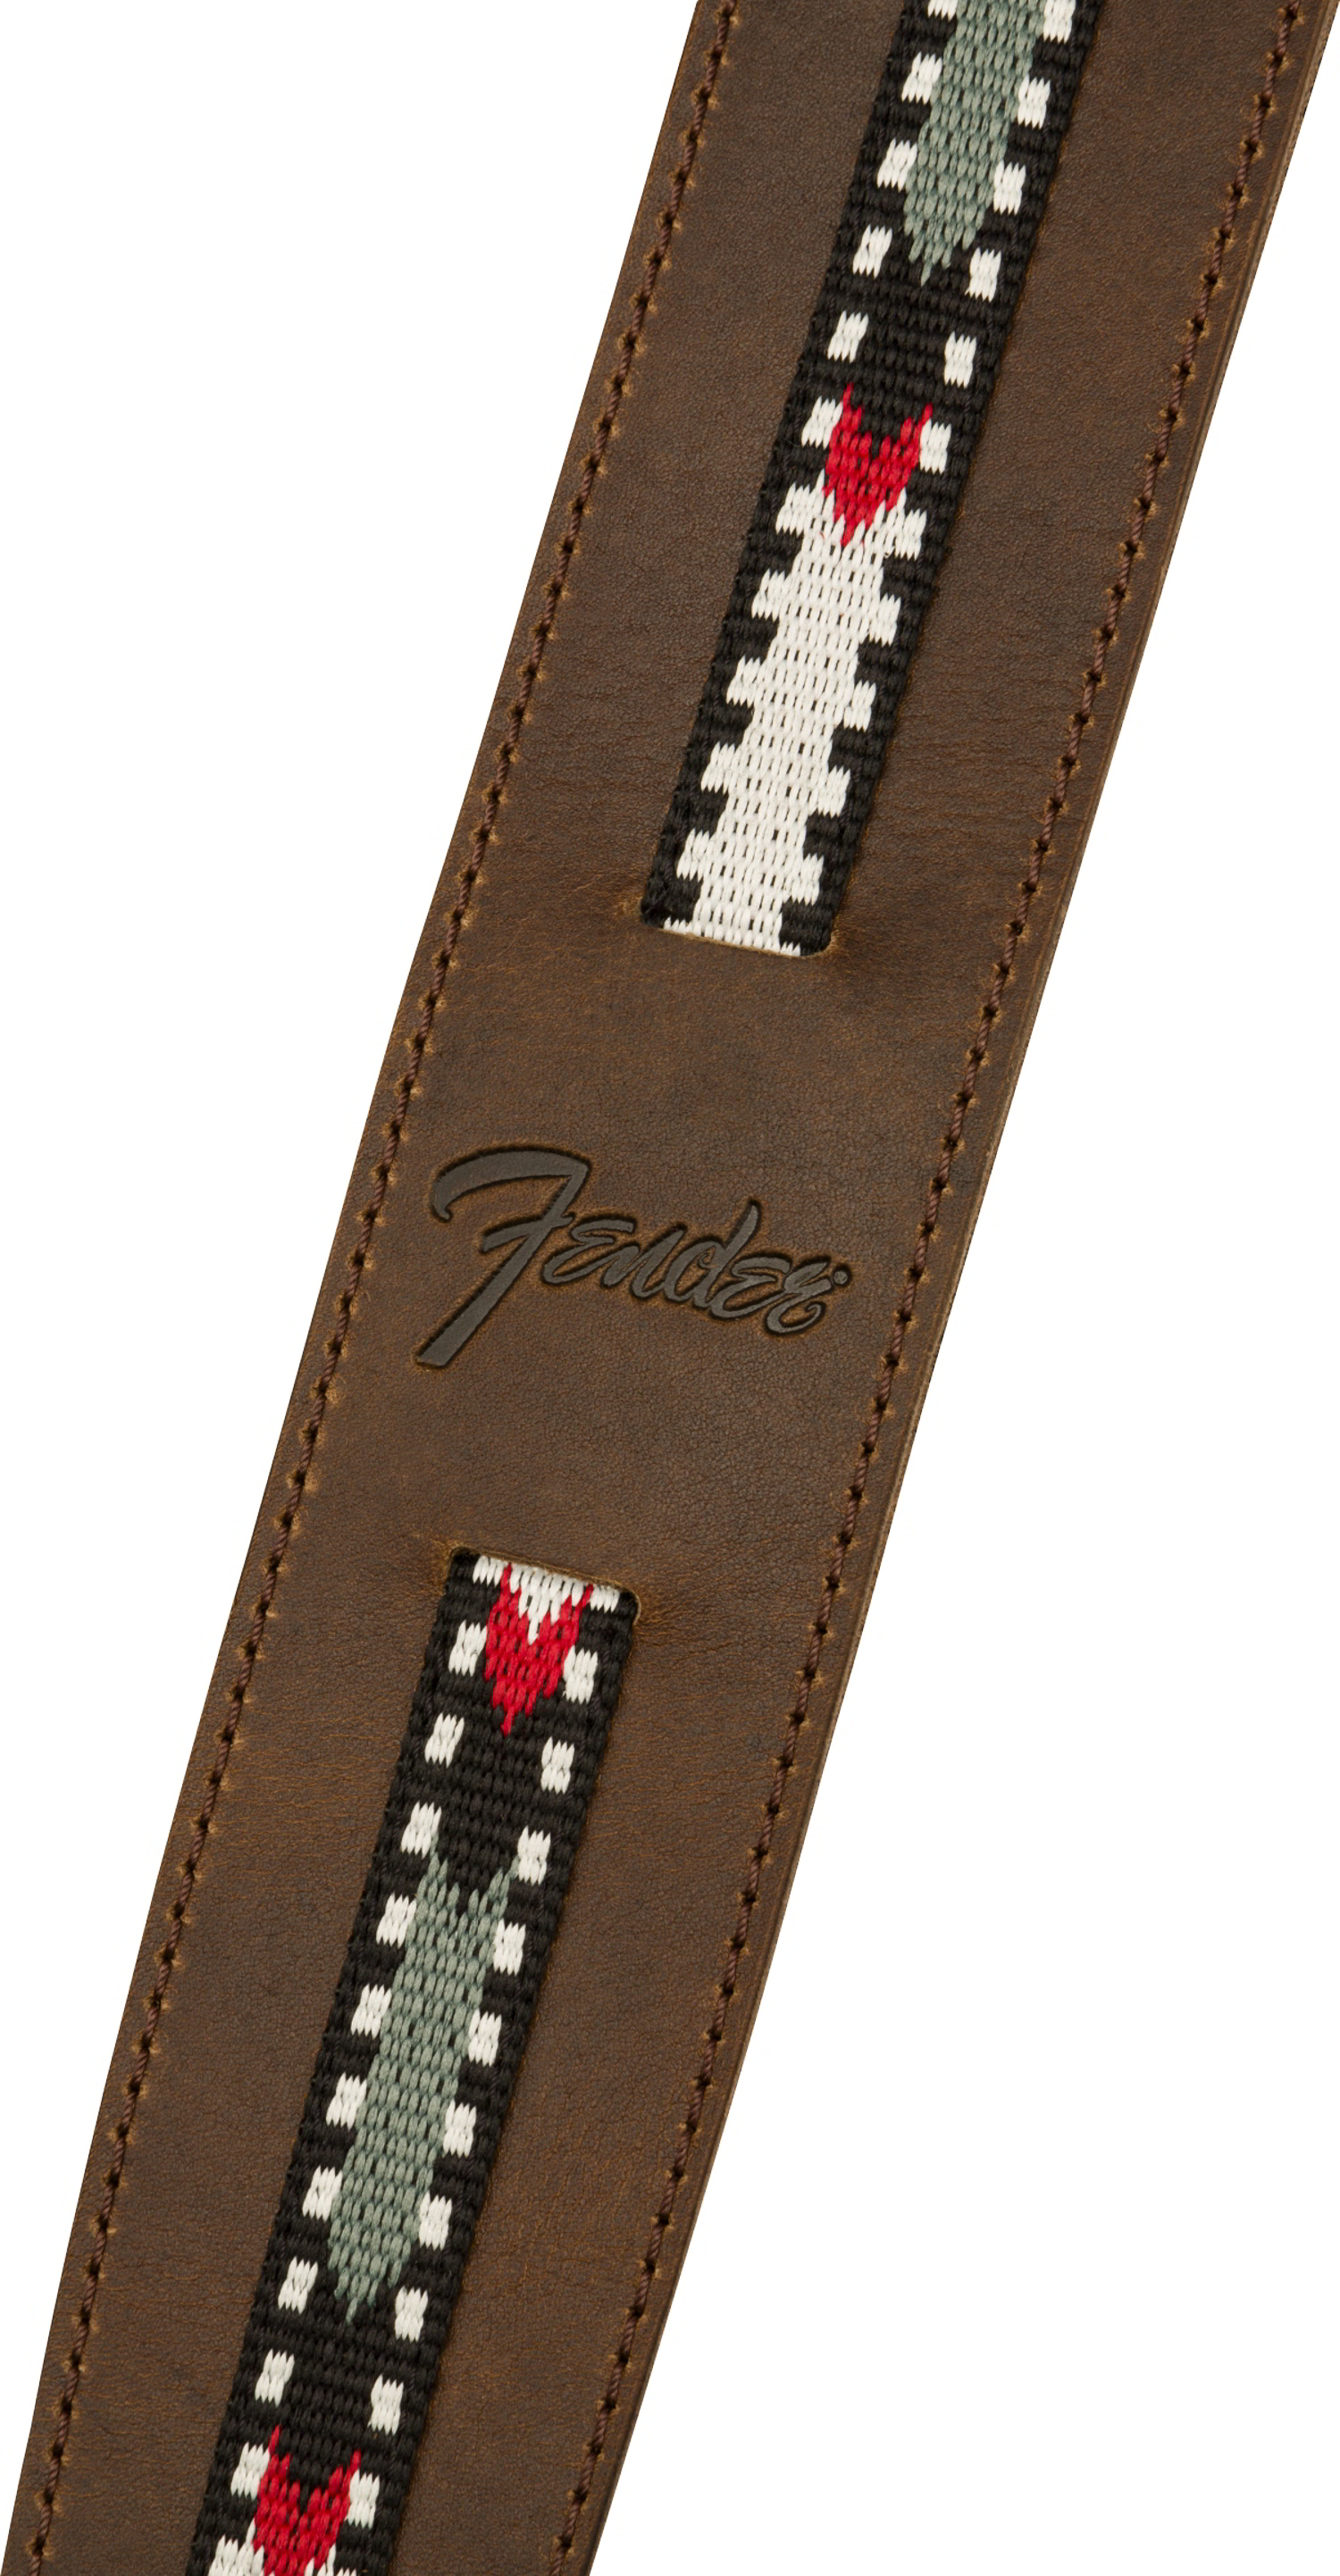 Paramount Acoustic Leather Strap, Brown追加画像